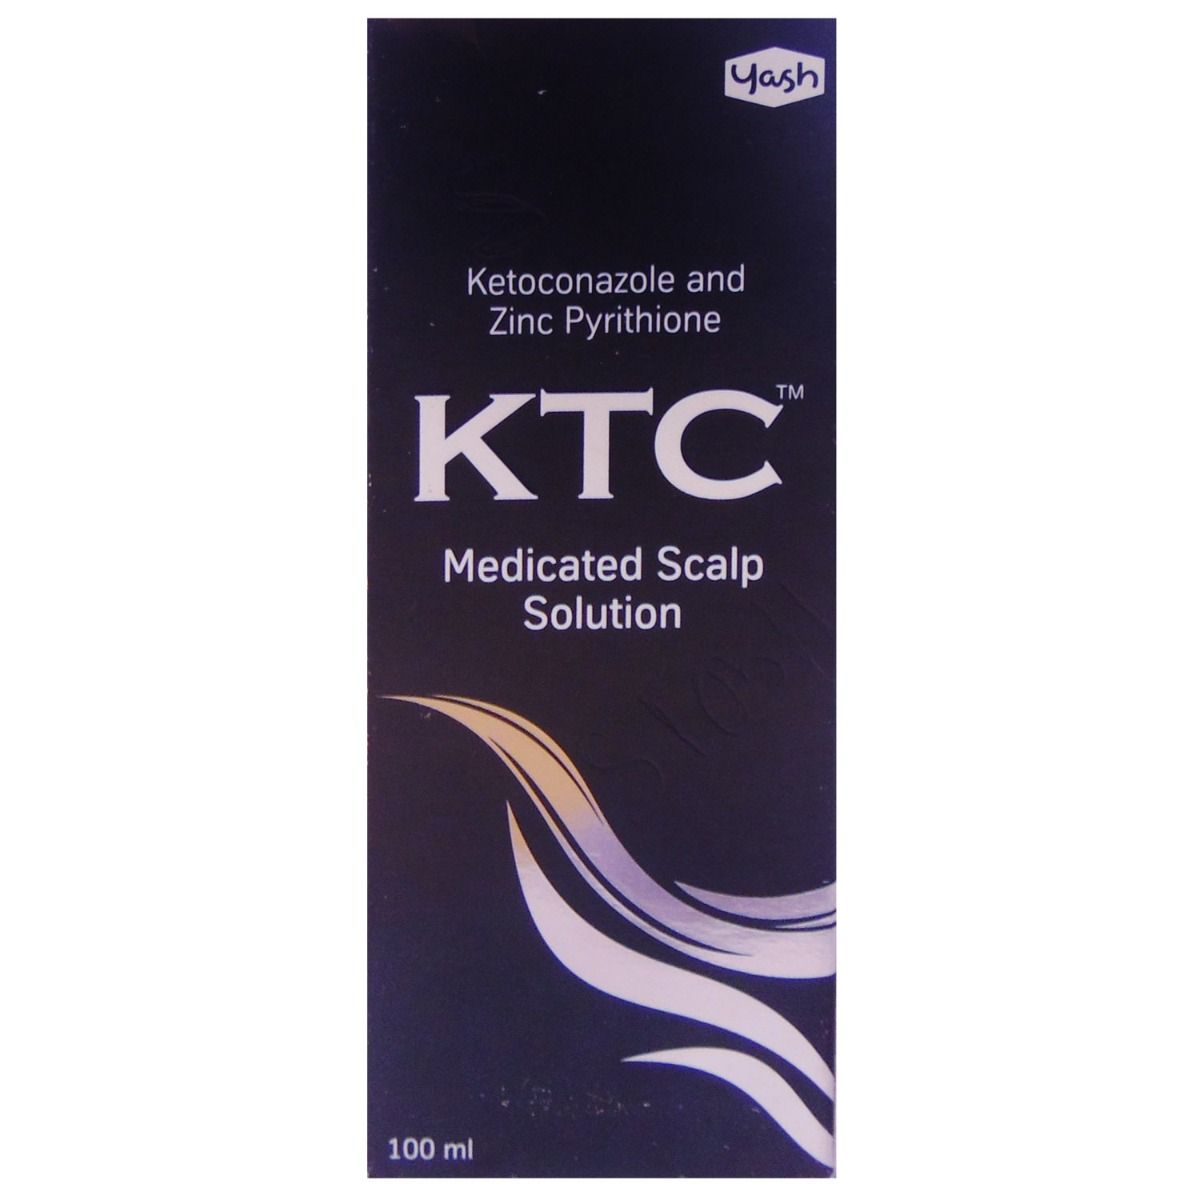 K T C Medicated Scalp Solution, 100 ml Price, Uses, Side Effects,  Composition - Apollo Pharmacy